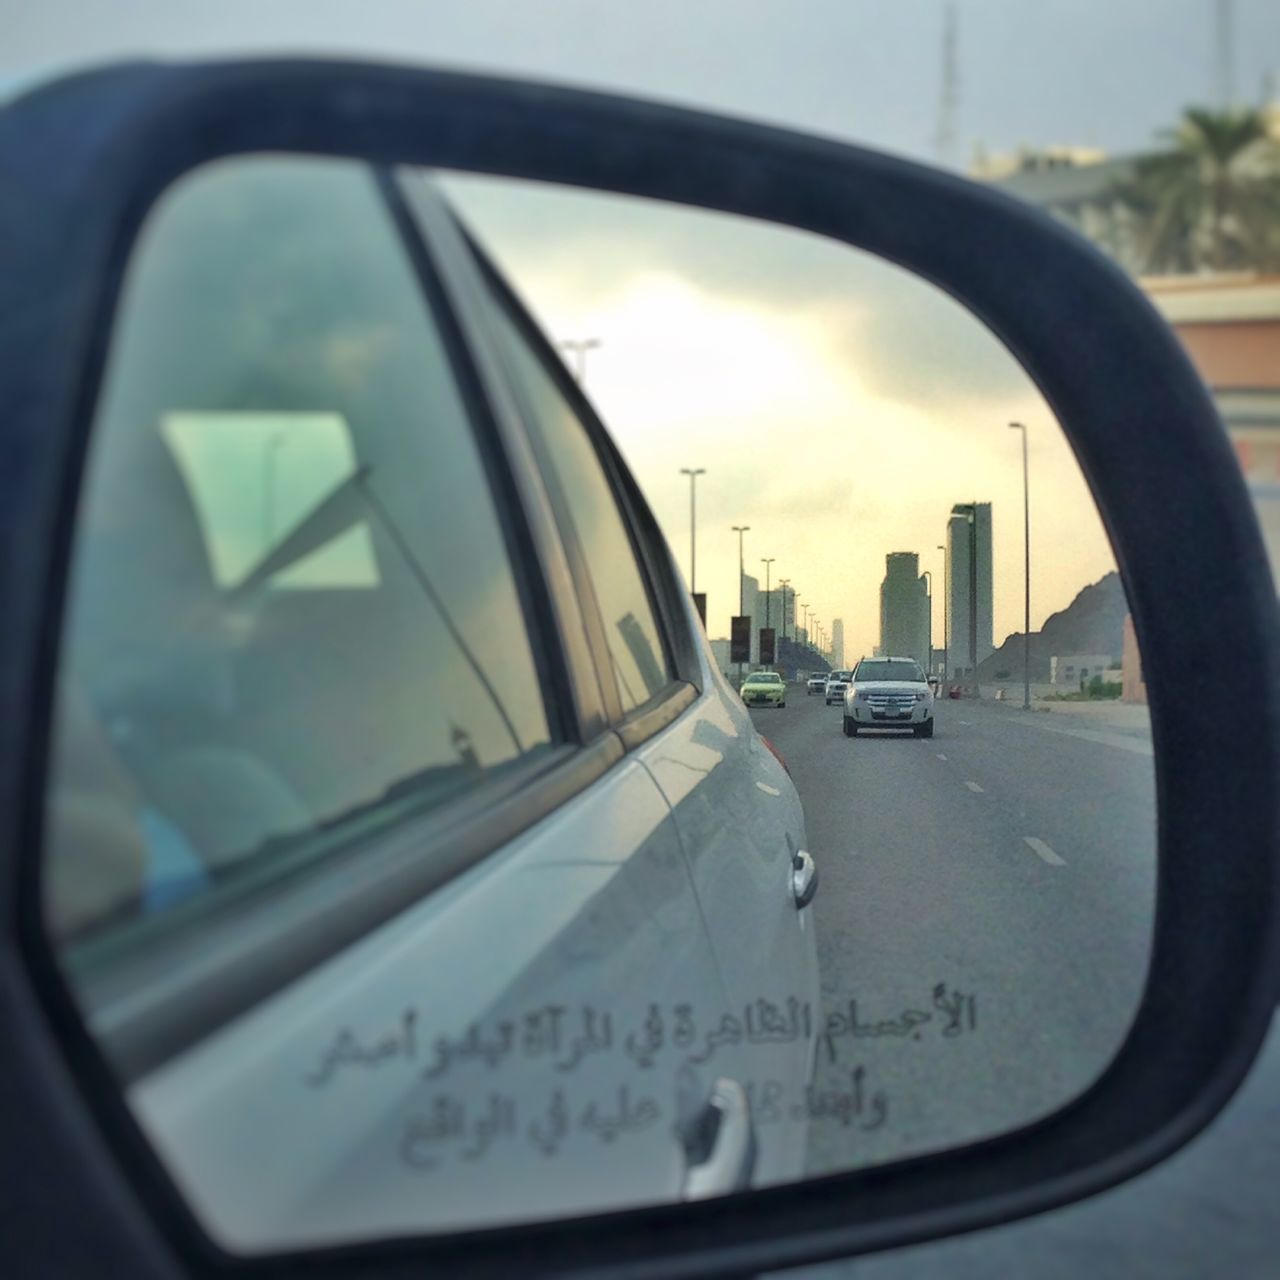 transportation, mode of transport, car, land vehicle, vehicle interior, car interior, road, travel, windshield, glass - material, close-up, part of, on the move, side-view mirror, street, sky, journey, transparent, dashboard, vehicle